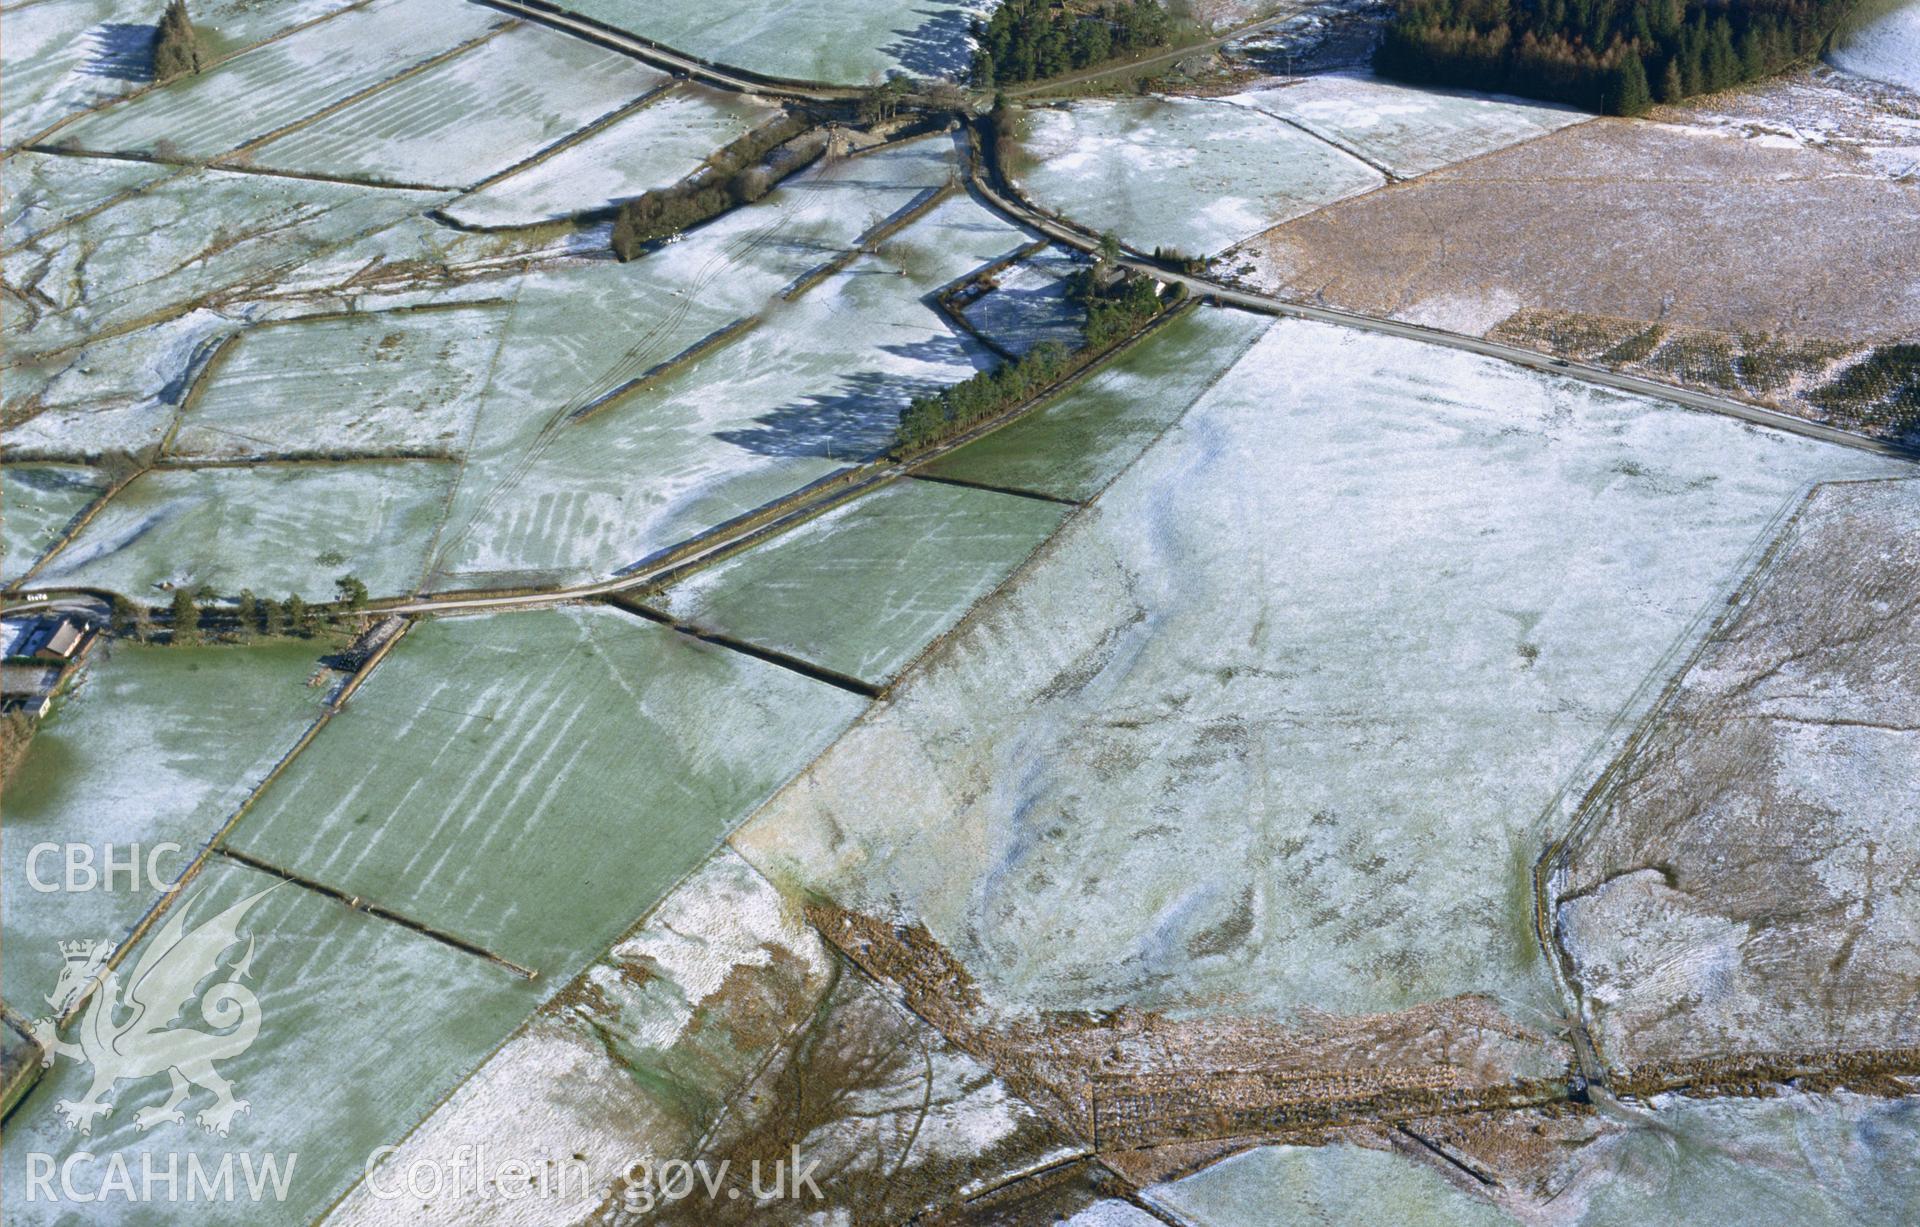 RCAHMW colour slide aerial photograph of Cwm Nant marching camp, St Harmon, under snow. Taken by Toby Driver on 31/01/2003